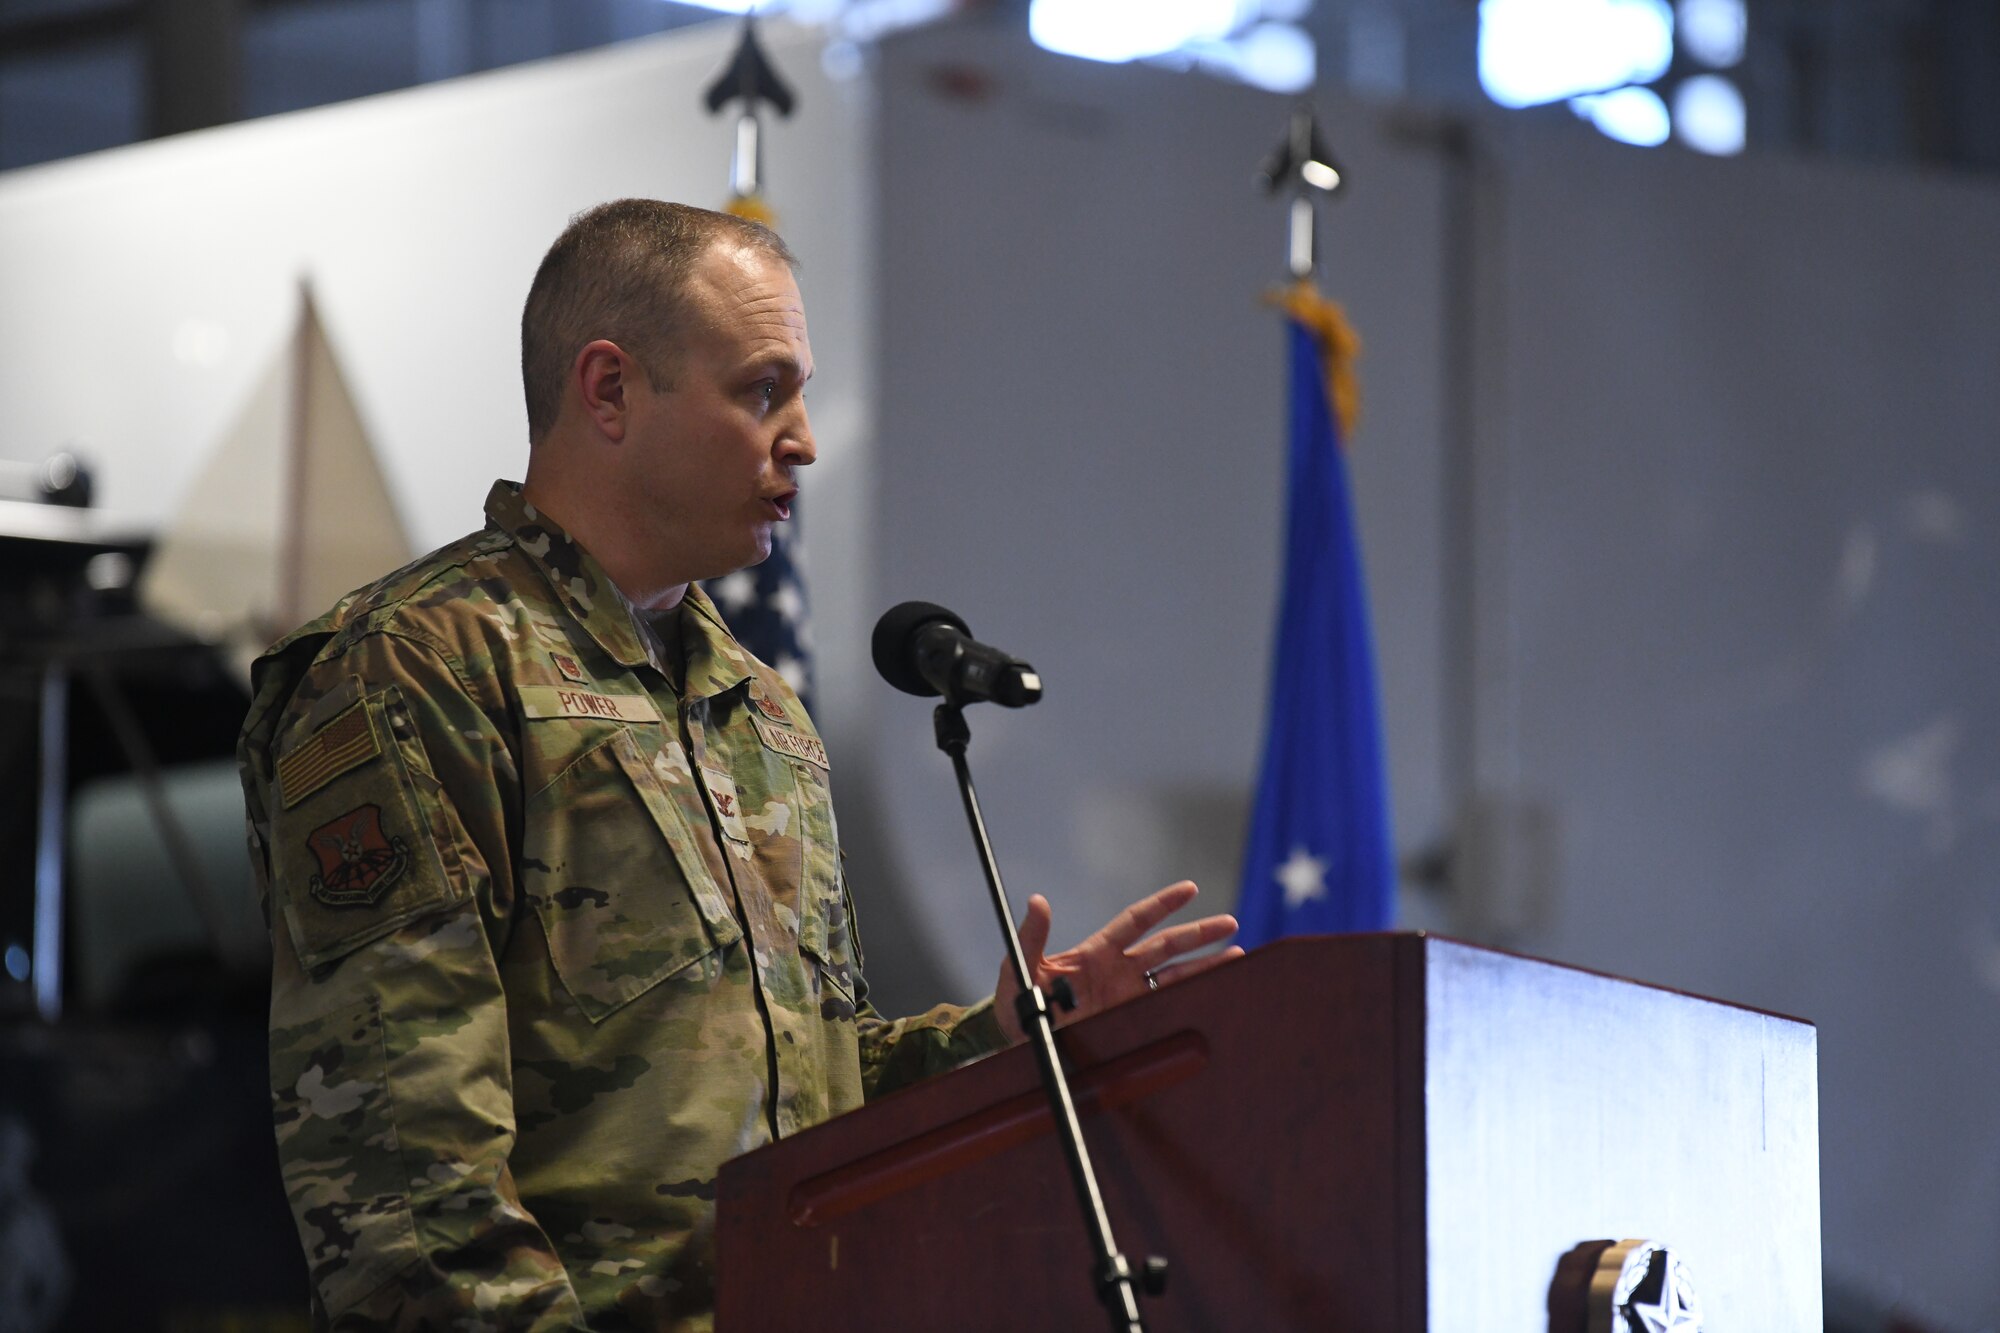 Col. Michael Power, incoming commander of the 90th Maintenance Group, speaks during the 90 MXG Change of Command Ceremony on F.E. Warren Air Force Base, Wyoming, on June 30, 2021. The change of command ceremony signifies the transition of command from Col. Brian Rico, the outgoing commander of 90 MXG, to Power. (U.S. Air Force photo by Airman 1st Class Frazier)